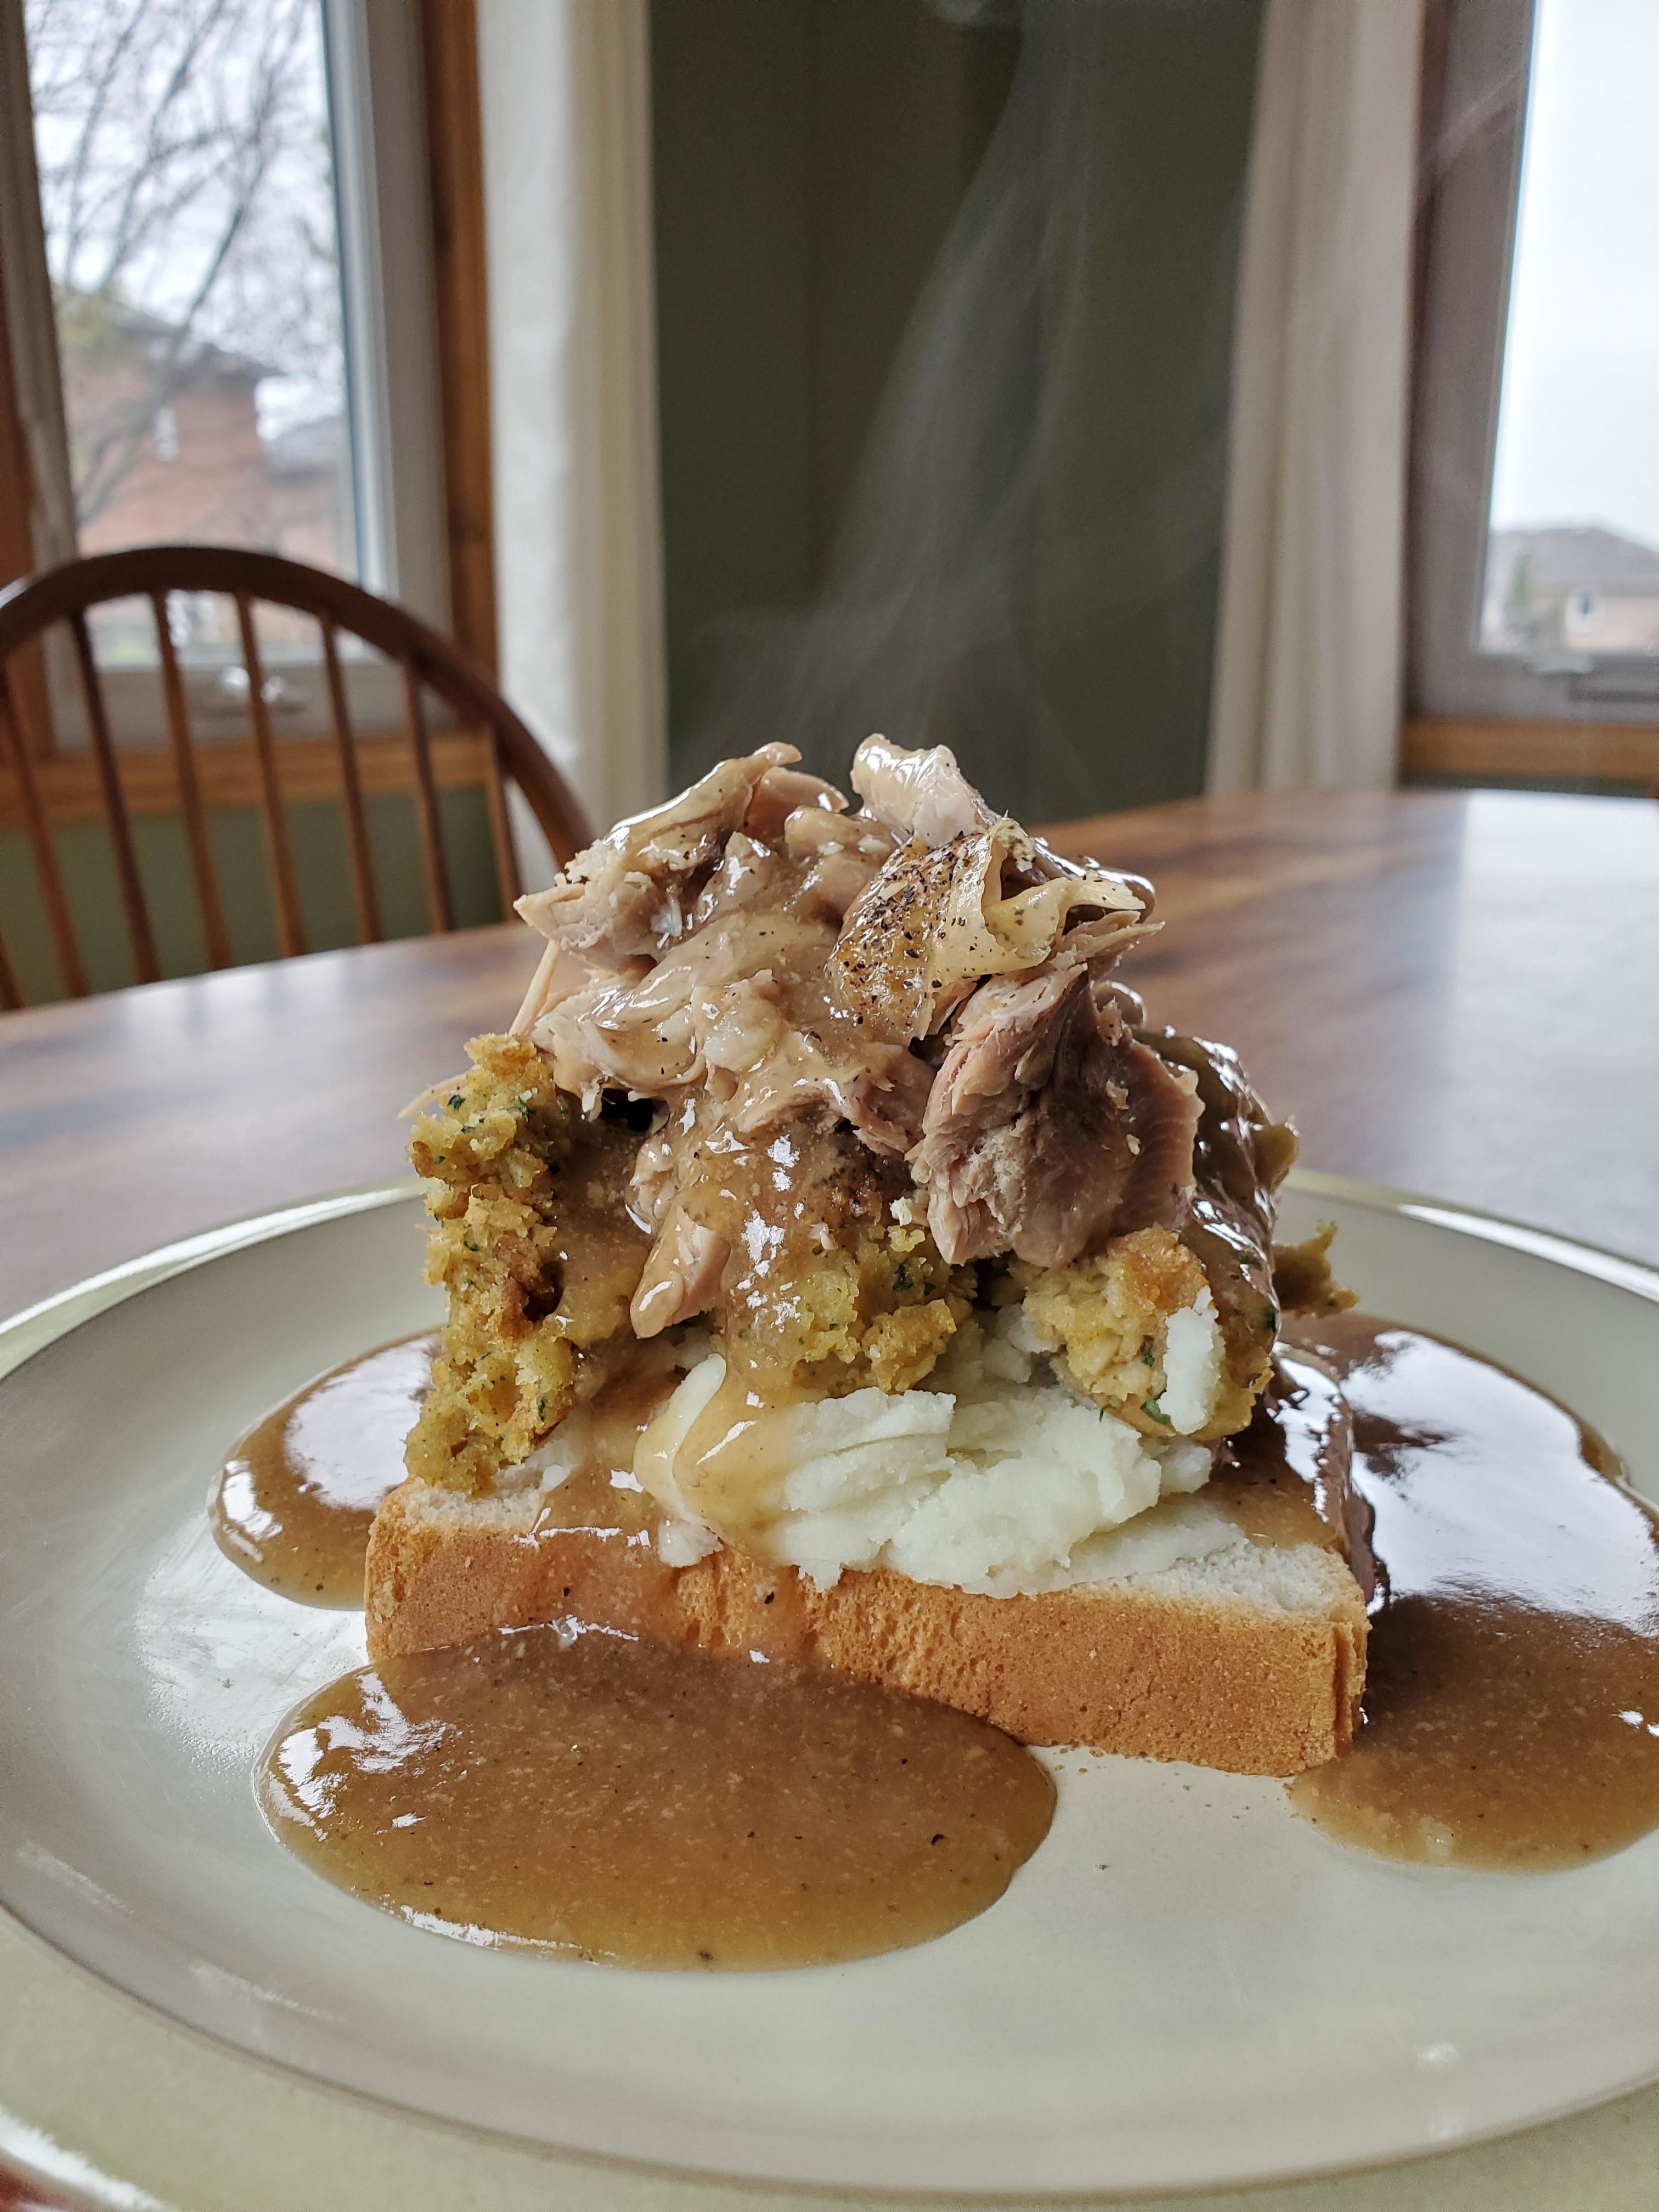 Open-faced turkey sandwich with stuffing, mashed potatoes, and gravy on a plate. Steam rises from the hot meal